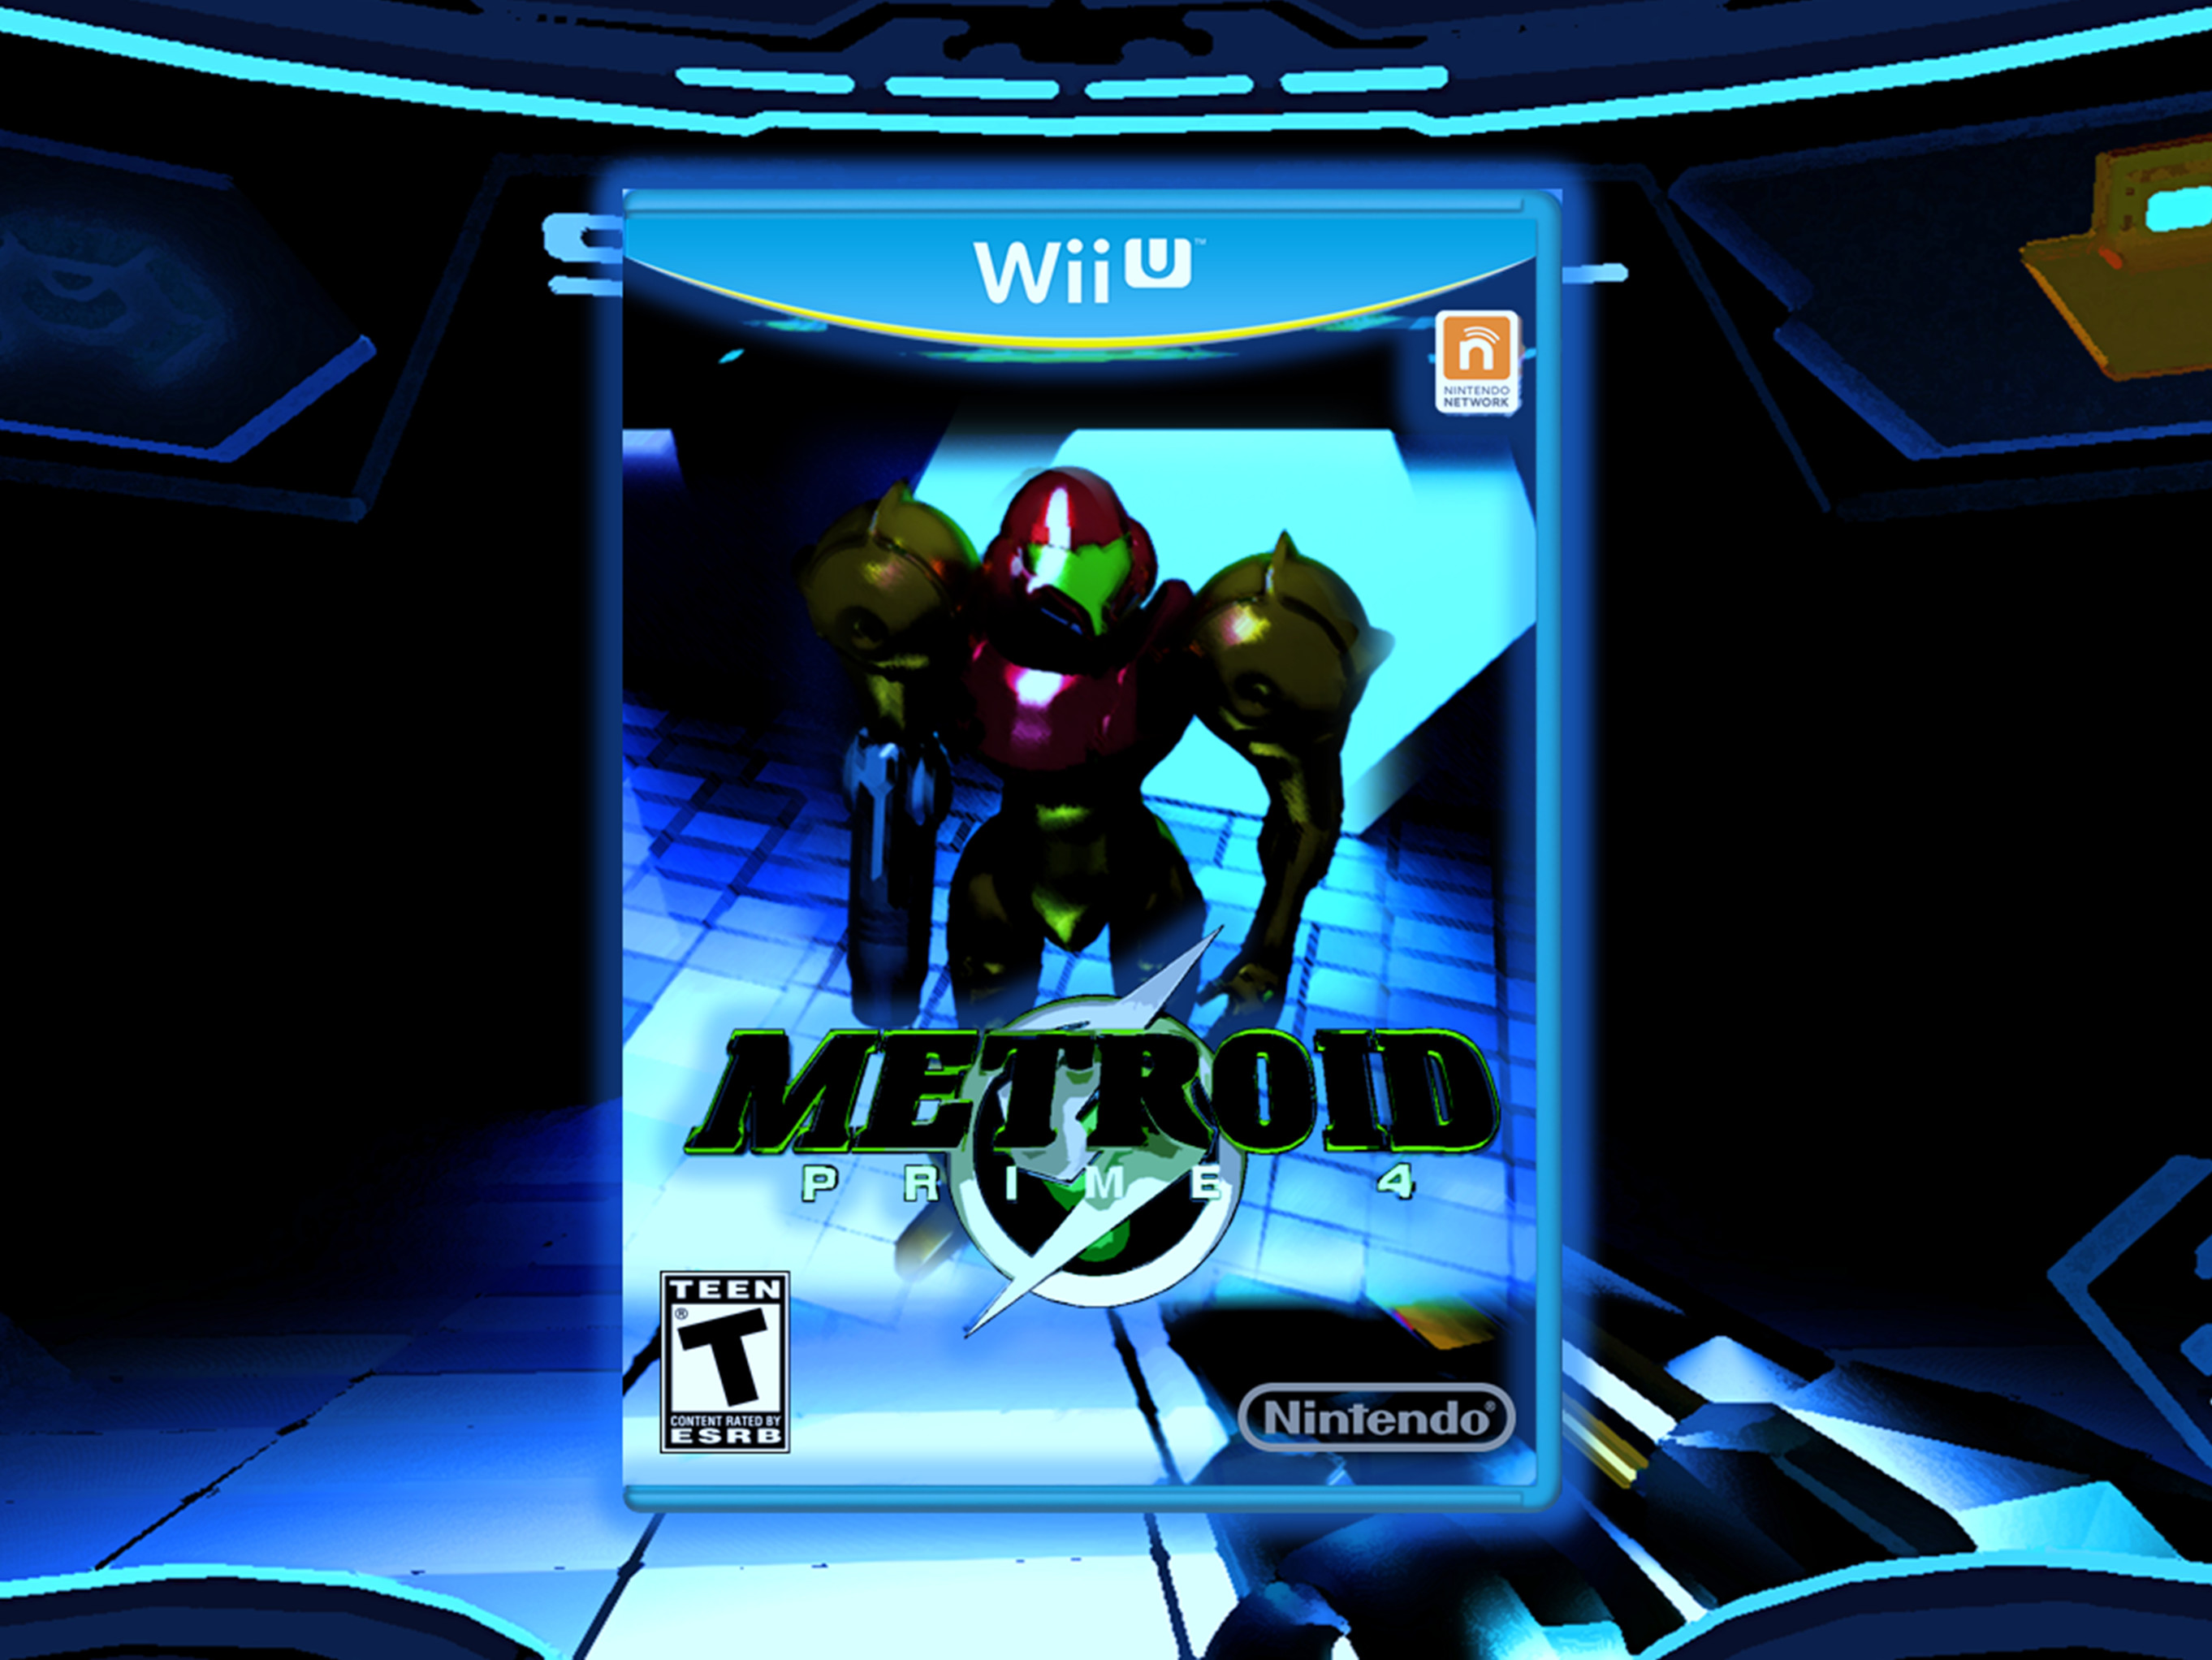 2724x2044 ... Metroid Prime 4 Cover Art by Mario64fANboy